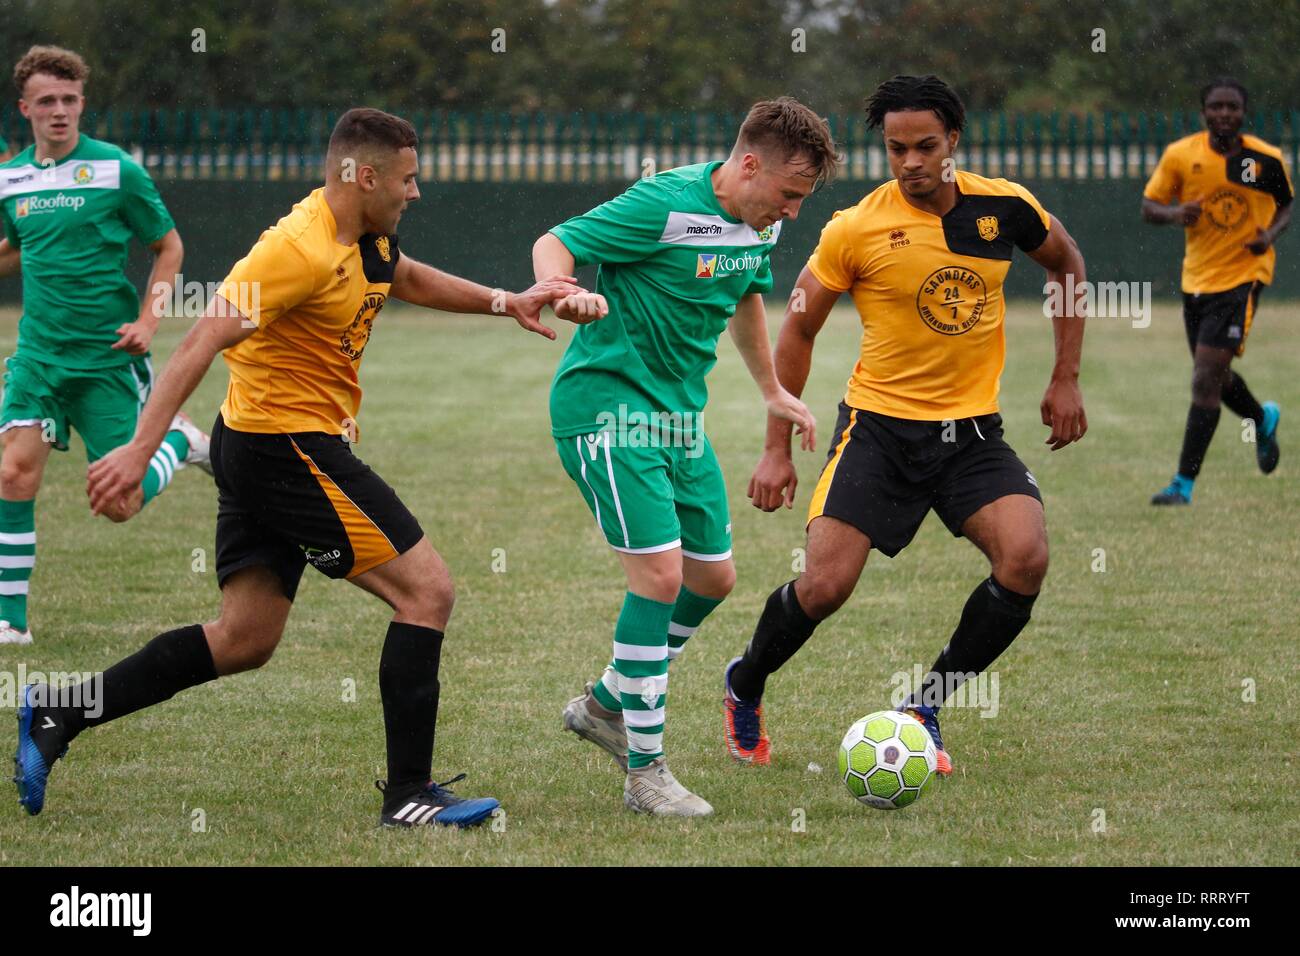 Elliott Kennedy for Bishops Cleeve FC vs Stotfold FC (gold strip), at Kayte Lane, Bishops Cleeve. 11th August 2018 Picture by Andrew Higgins/TWM Stock Photo